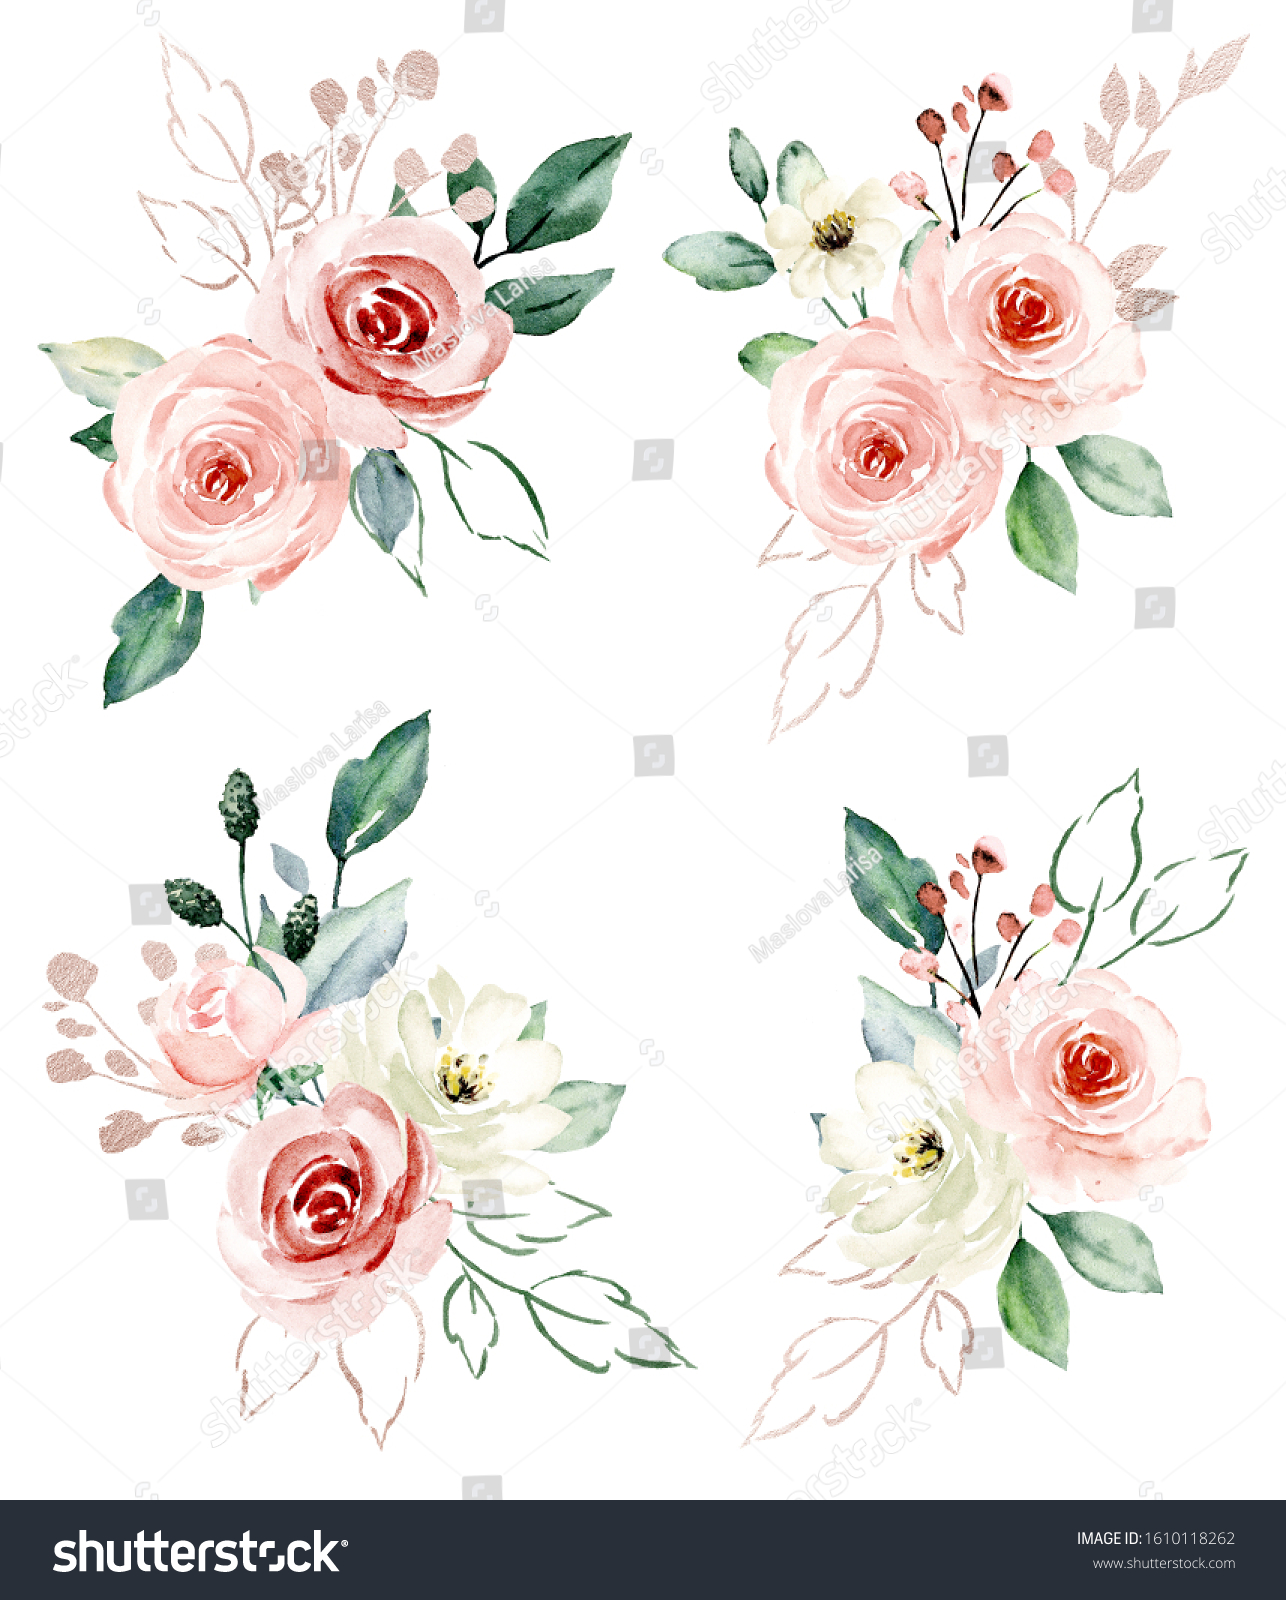 Set Flowers Pink Watercolor Floral Blossom Stock Illustration 1610118262